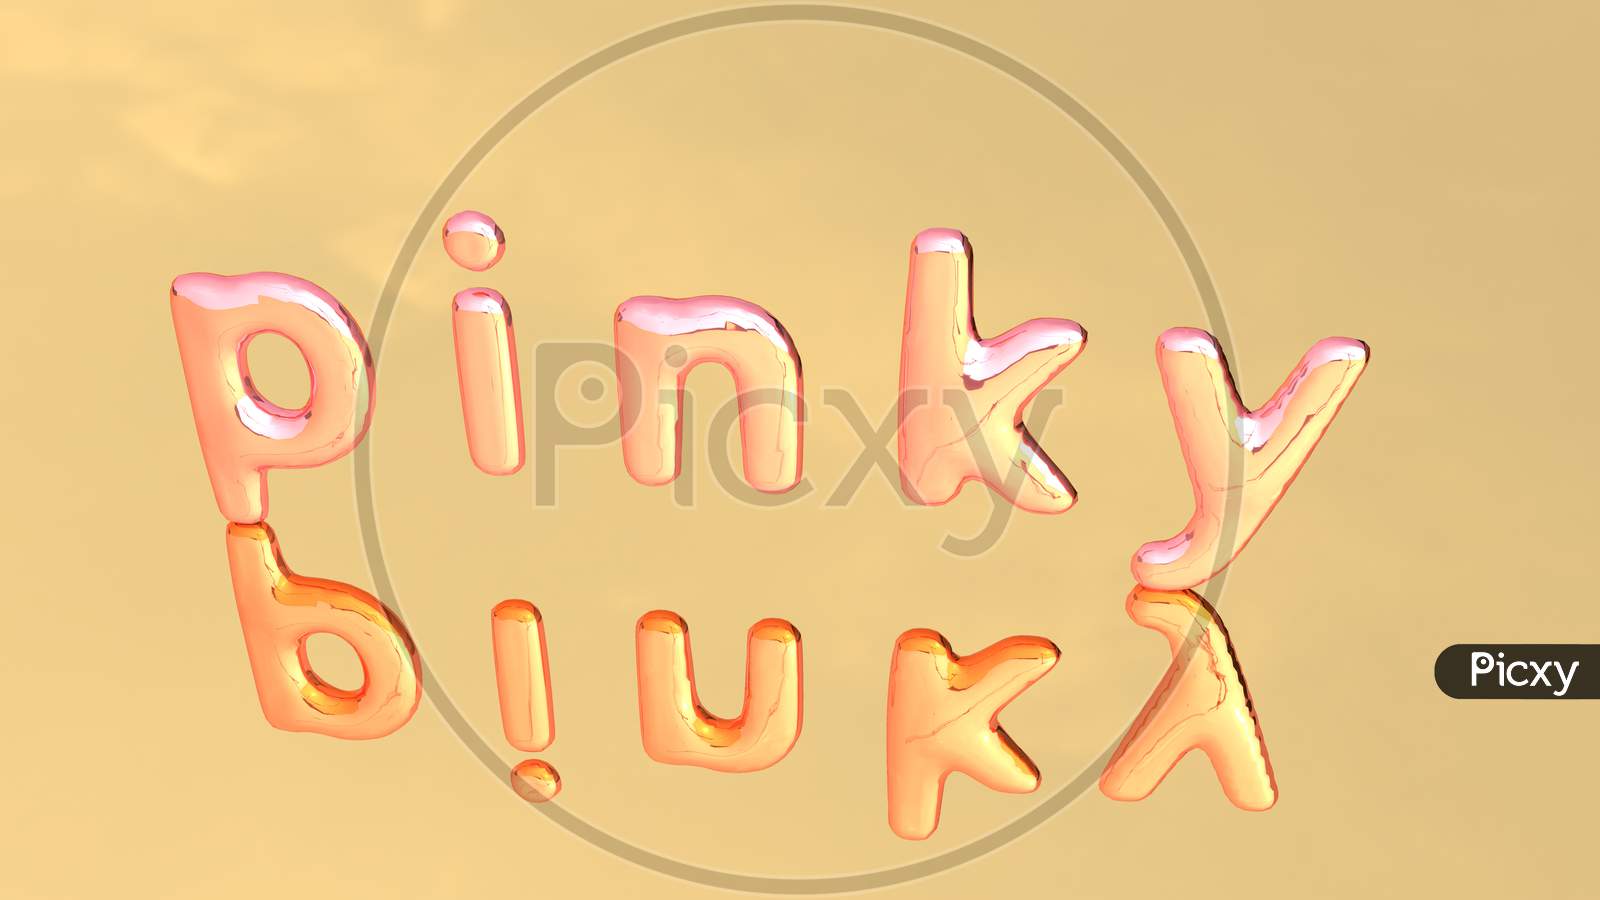 Letter Pinky With 3D Shapes On A Beautiful Background.